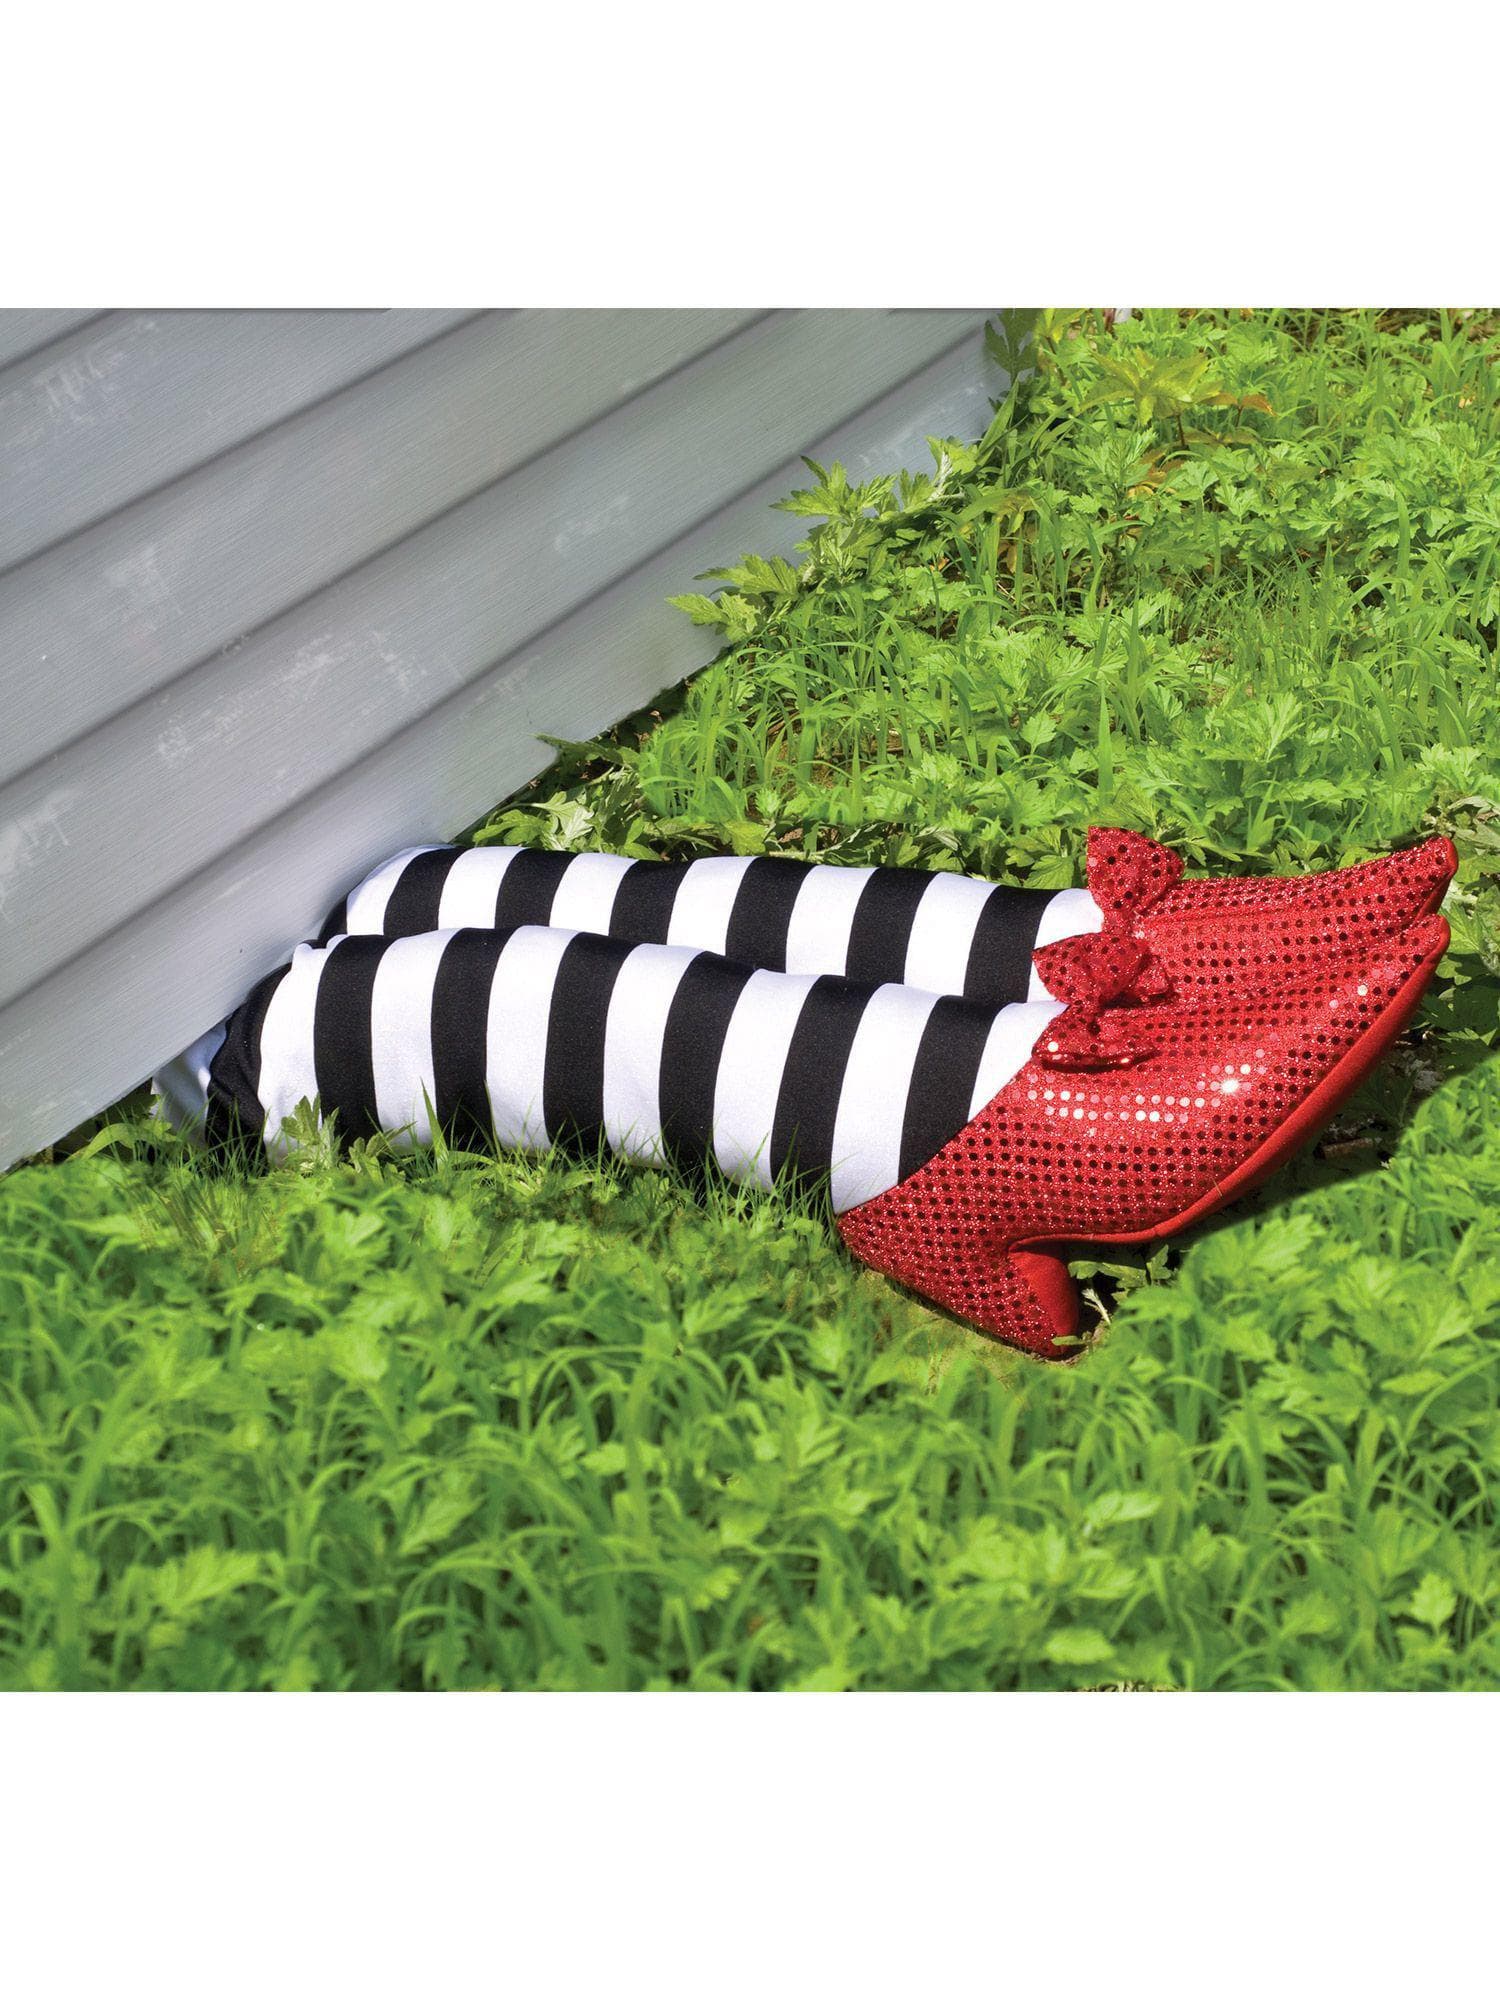 18-inch Wizard of Oz Wicked Witch Leg Decoration - costumes.com